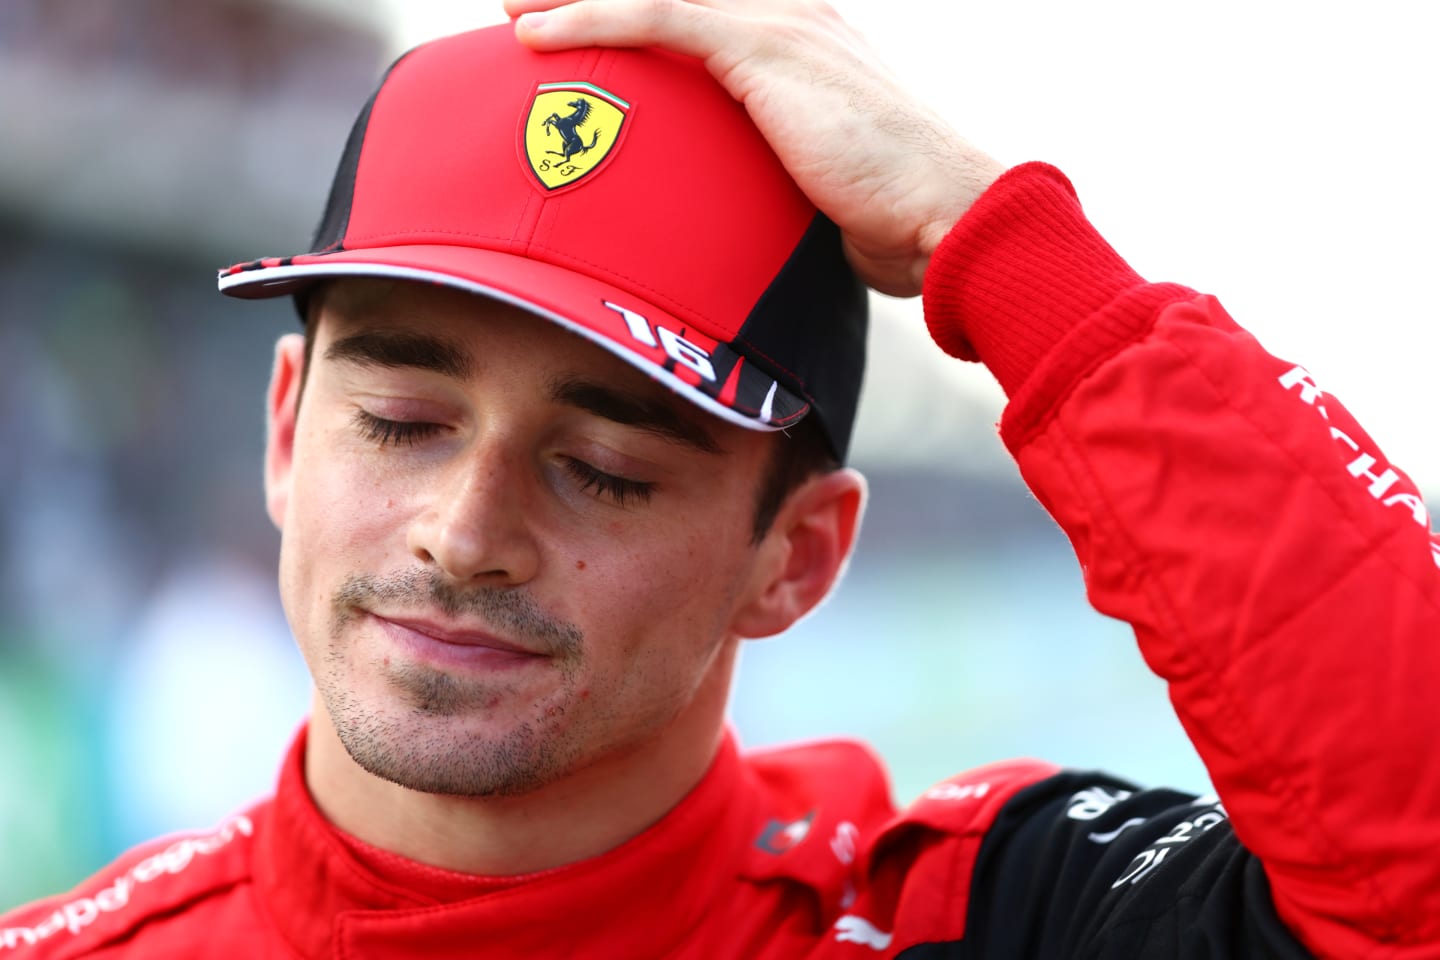 AUSTIN, TEXAS - OCTOBER 22: Second placed qualifier Charles Leclerc of Monaco and Ferrari looks on in parc ferme during qualifying ahead of the F1 Grand Prix of USA at Circuit of The Americas on October 22, 2022 in Austin, Texas. (Photo by Dan Istitene - Formula 1/Formula 1 via Getty Images)